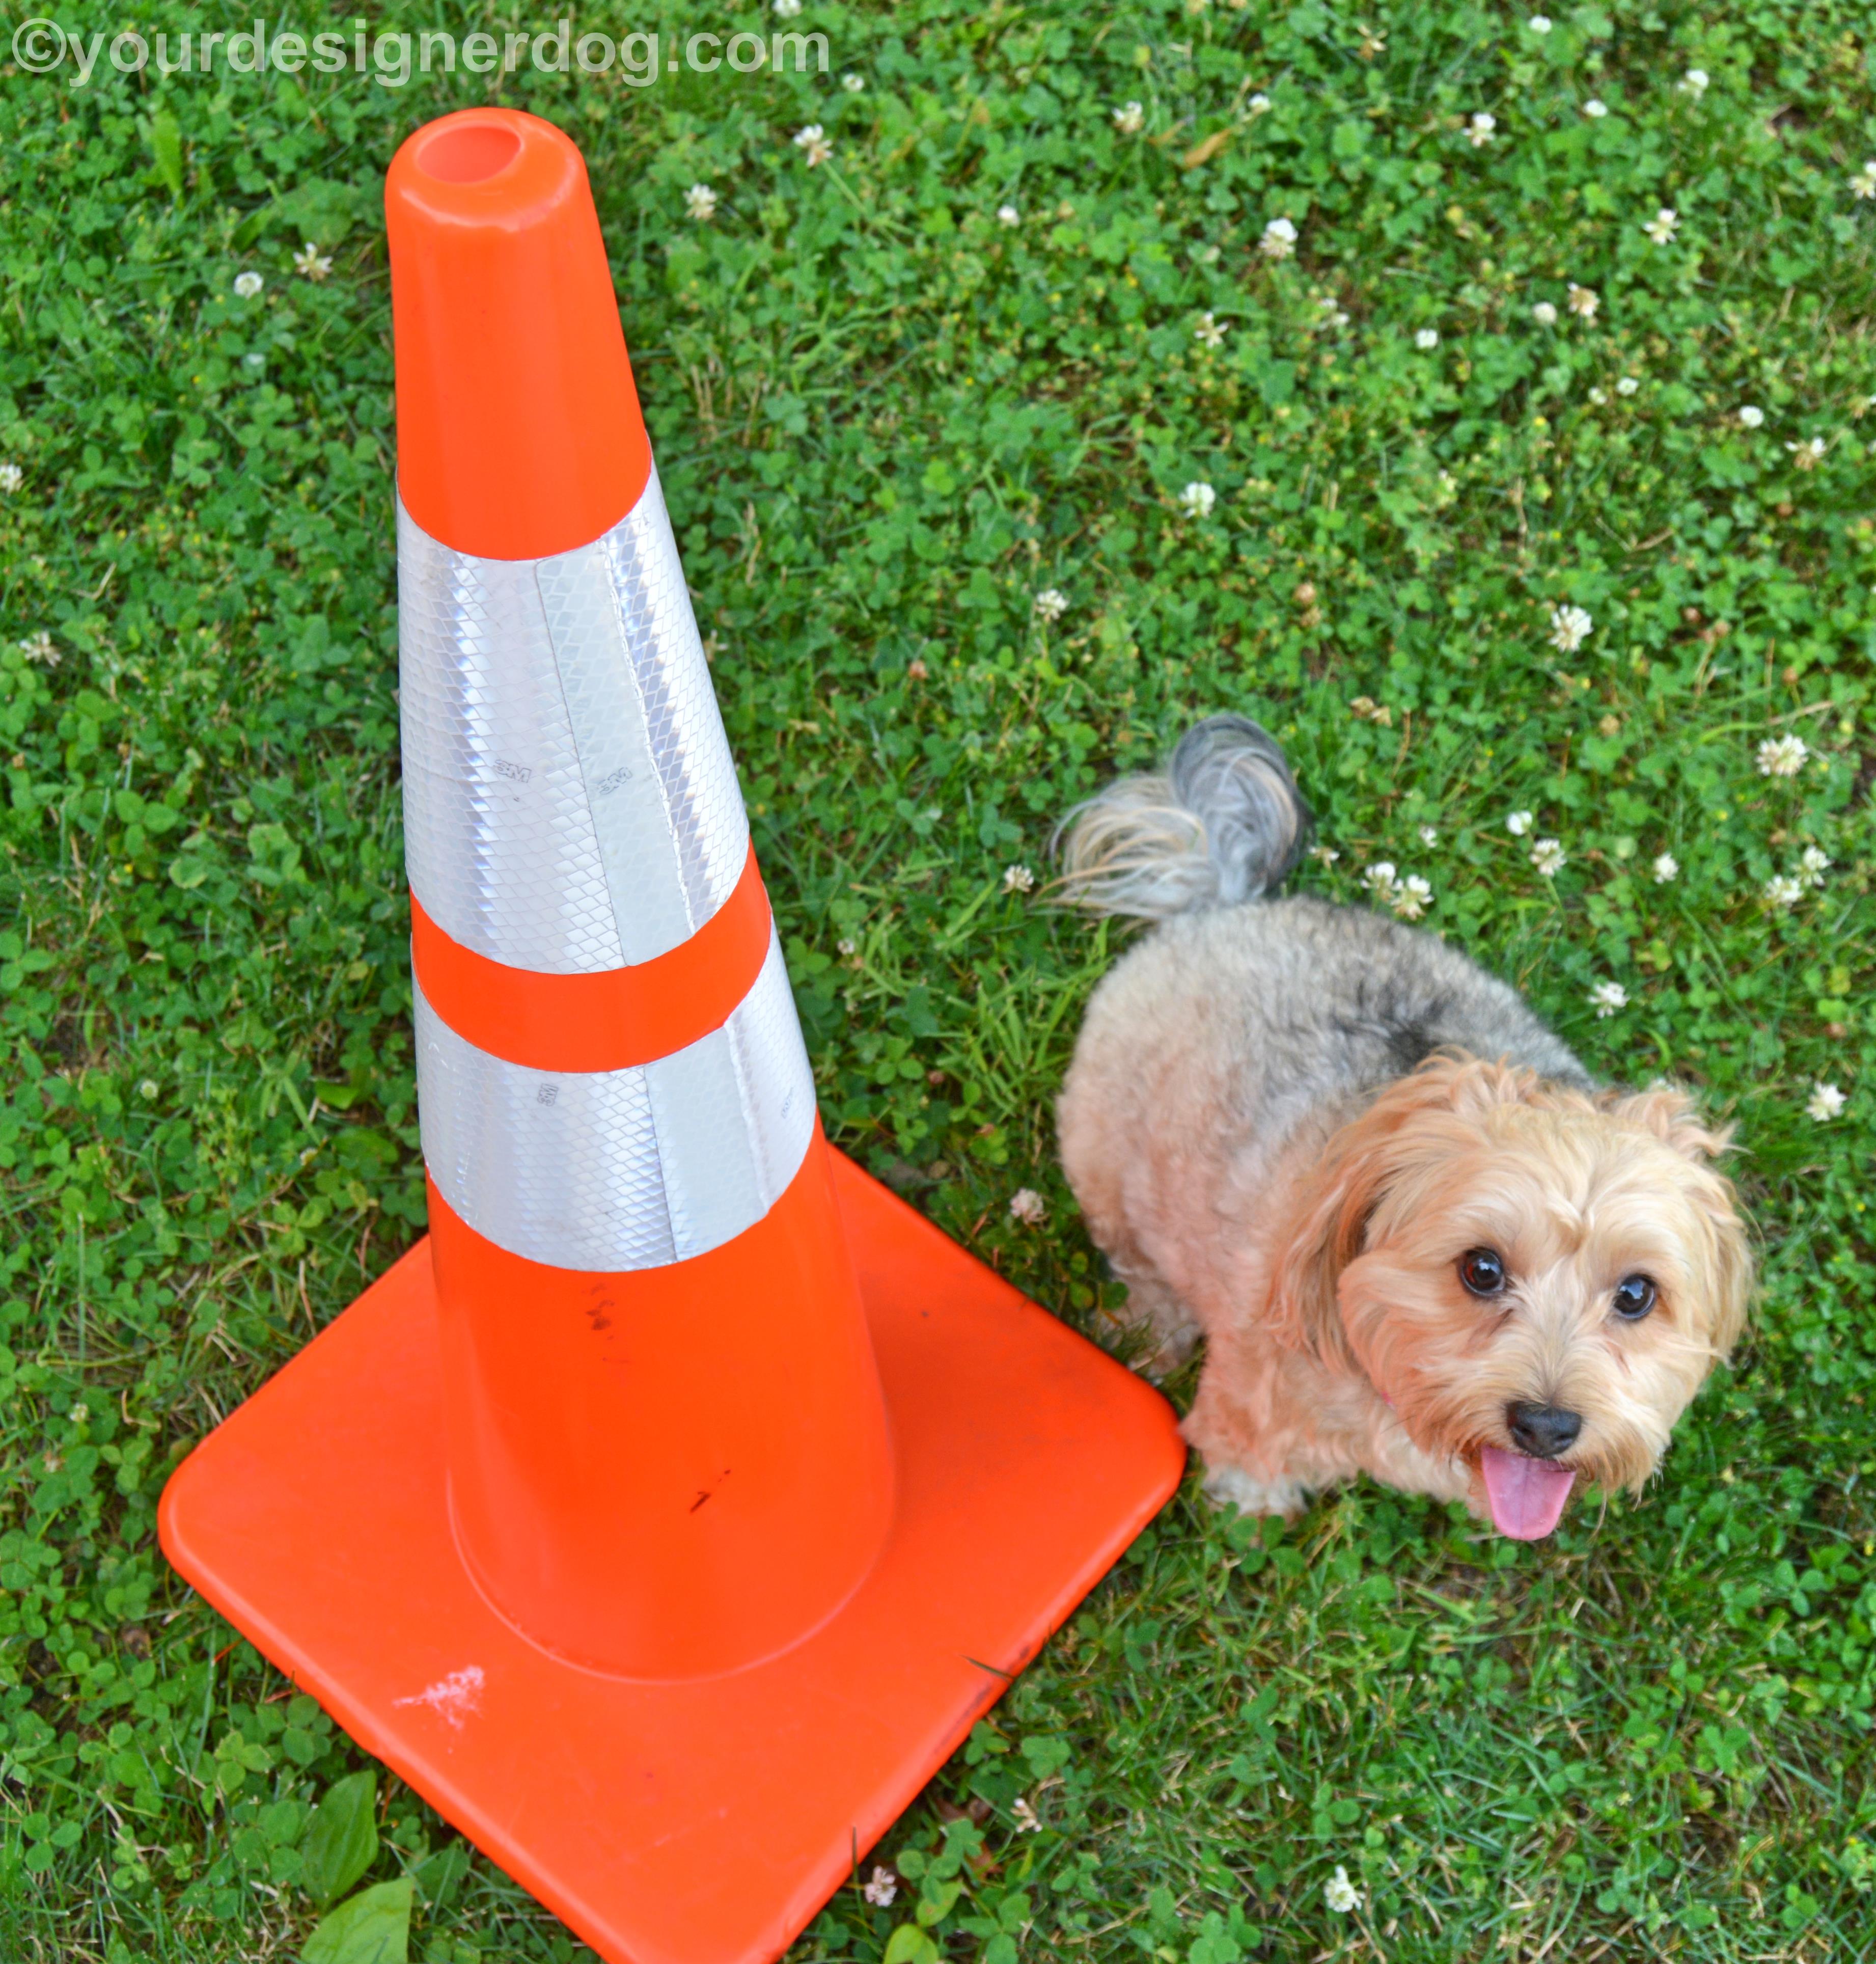 dogs, designer dogs, Yorkipoo, yorkie poo, traffic cone, tongue out, dog smiling